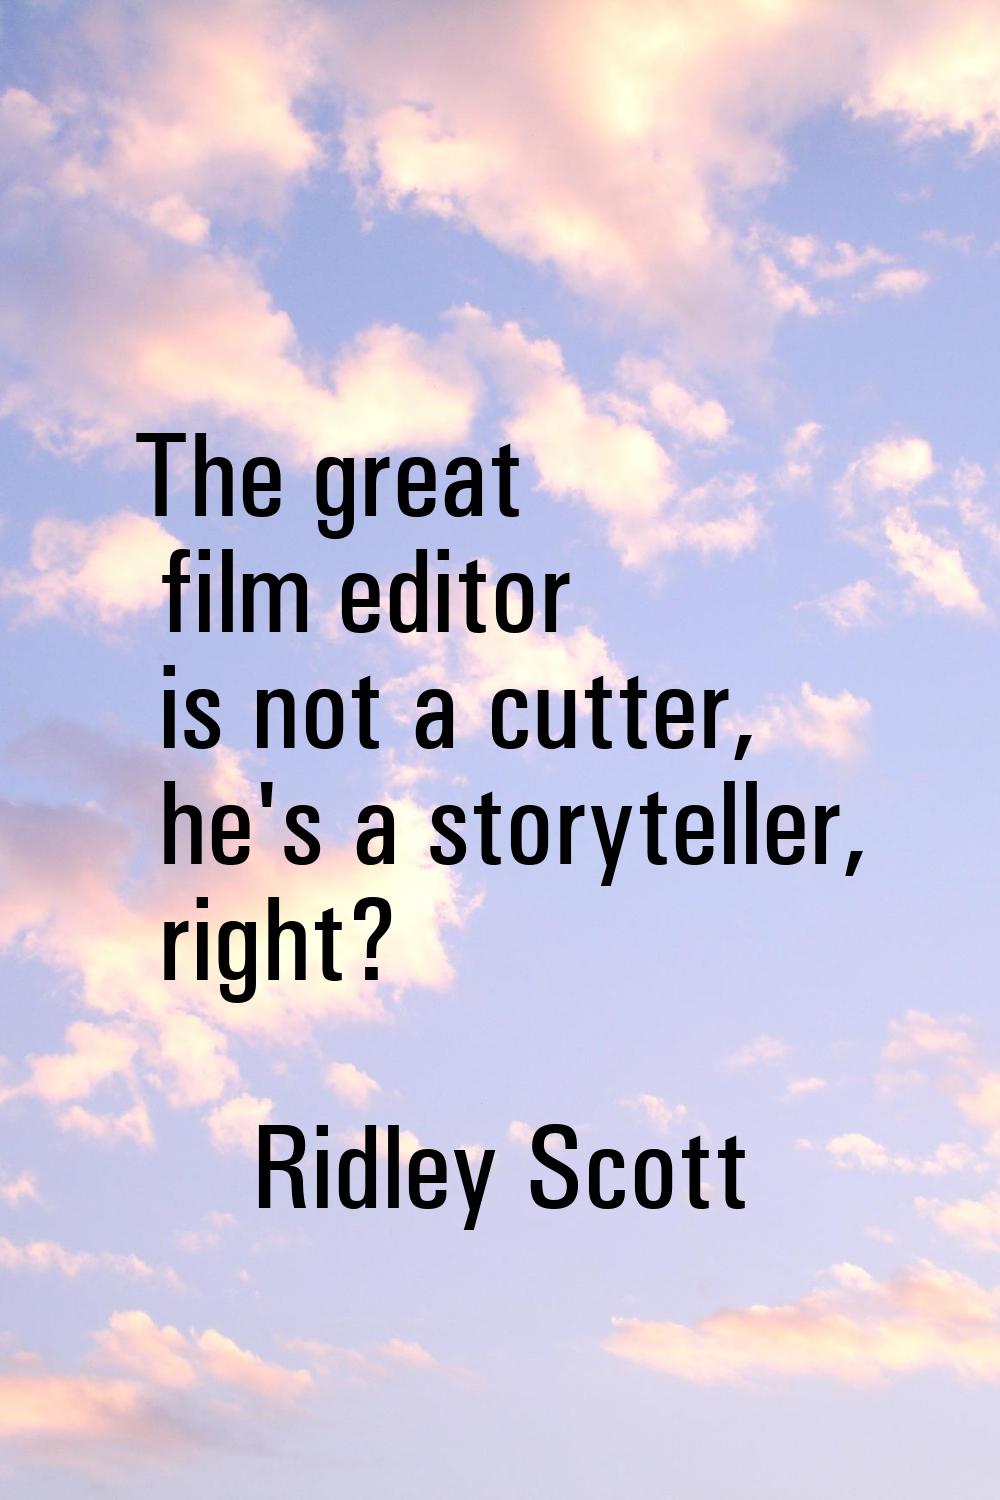 The great film editor is not a cutter, he's a storyteller, right?